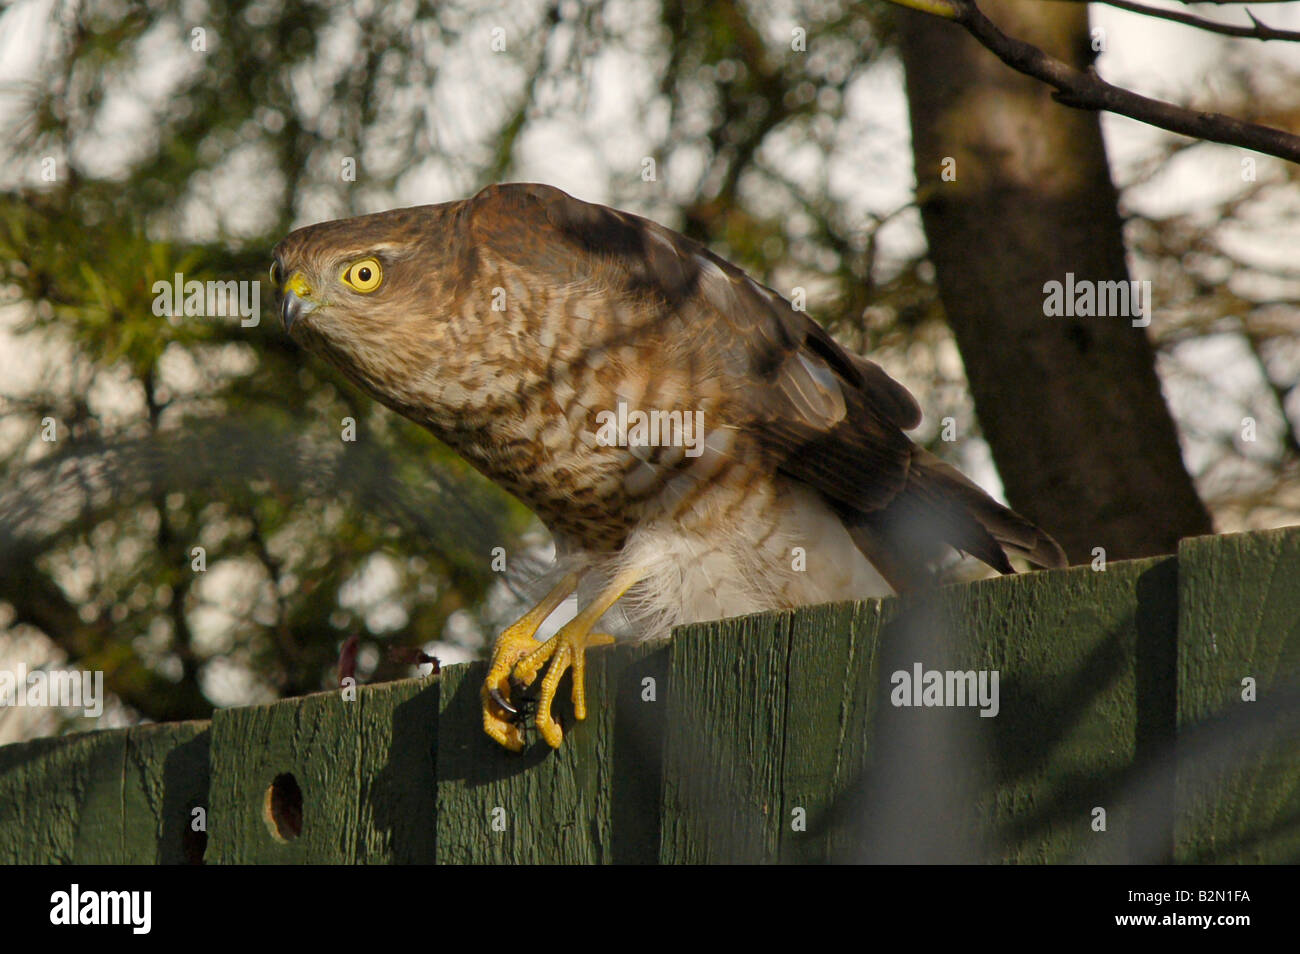 Sparrowhawk on garden fence in hunting mode. Stock Photo